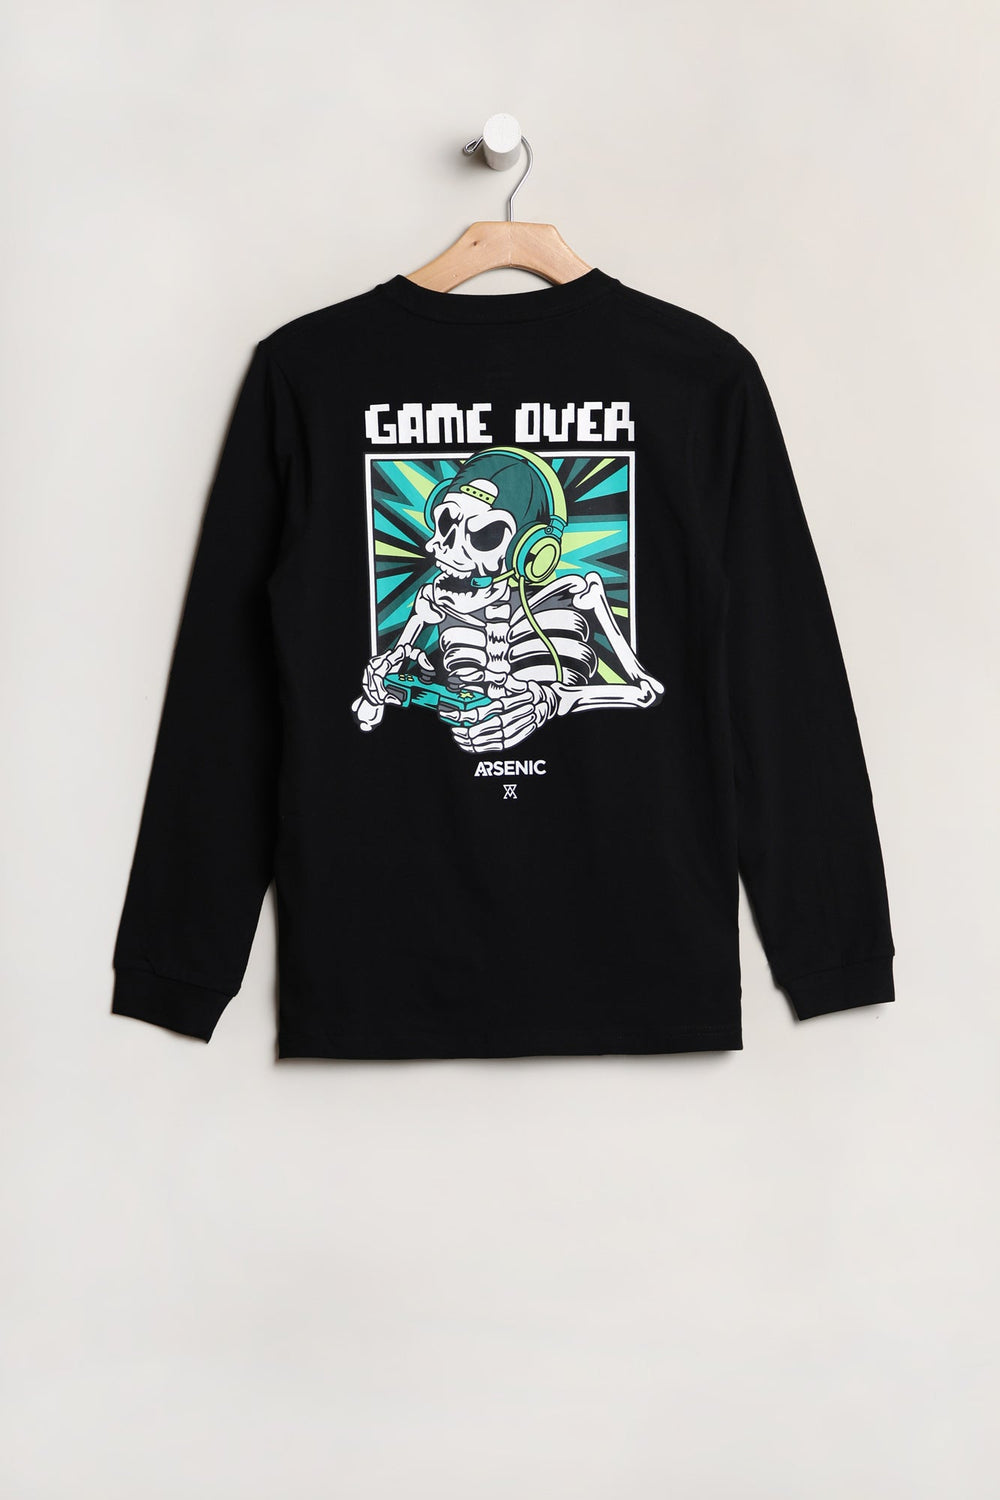 Arsenic Youth Game Over Long Sleeve Top Arsenic Youth Game Over Long Sleeve Top